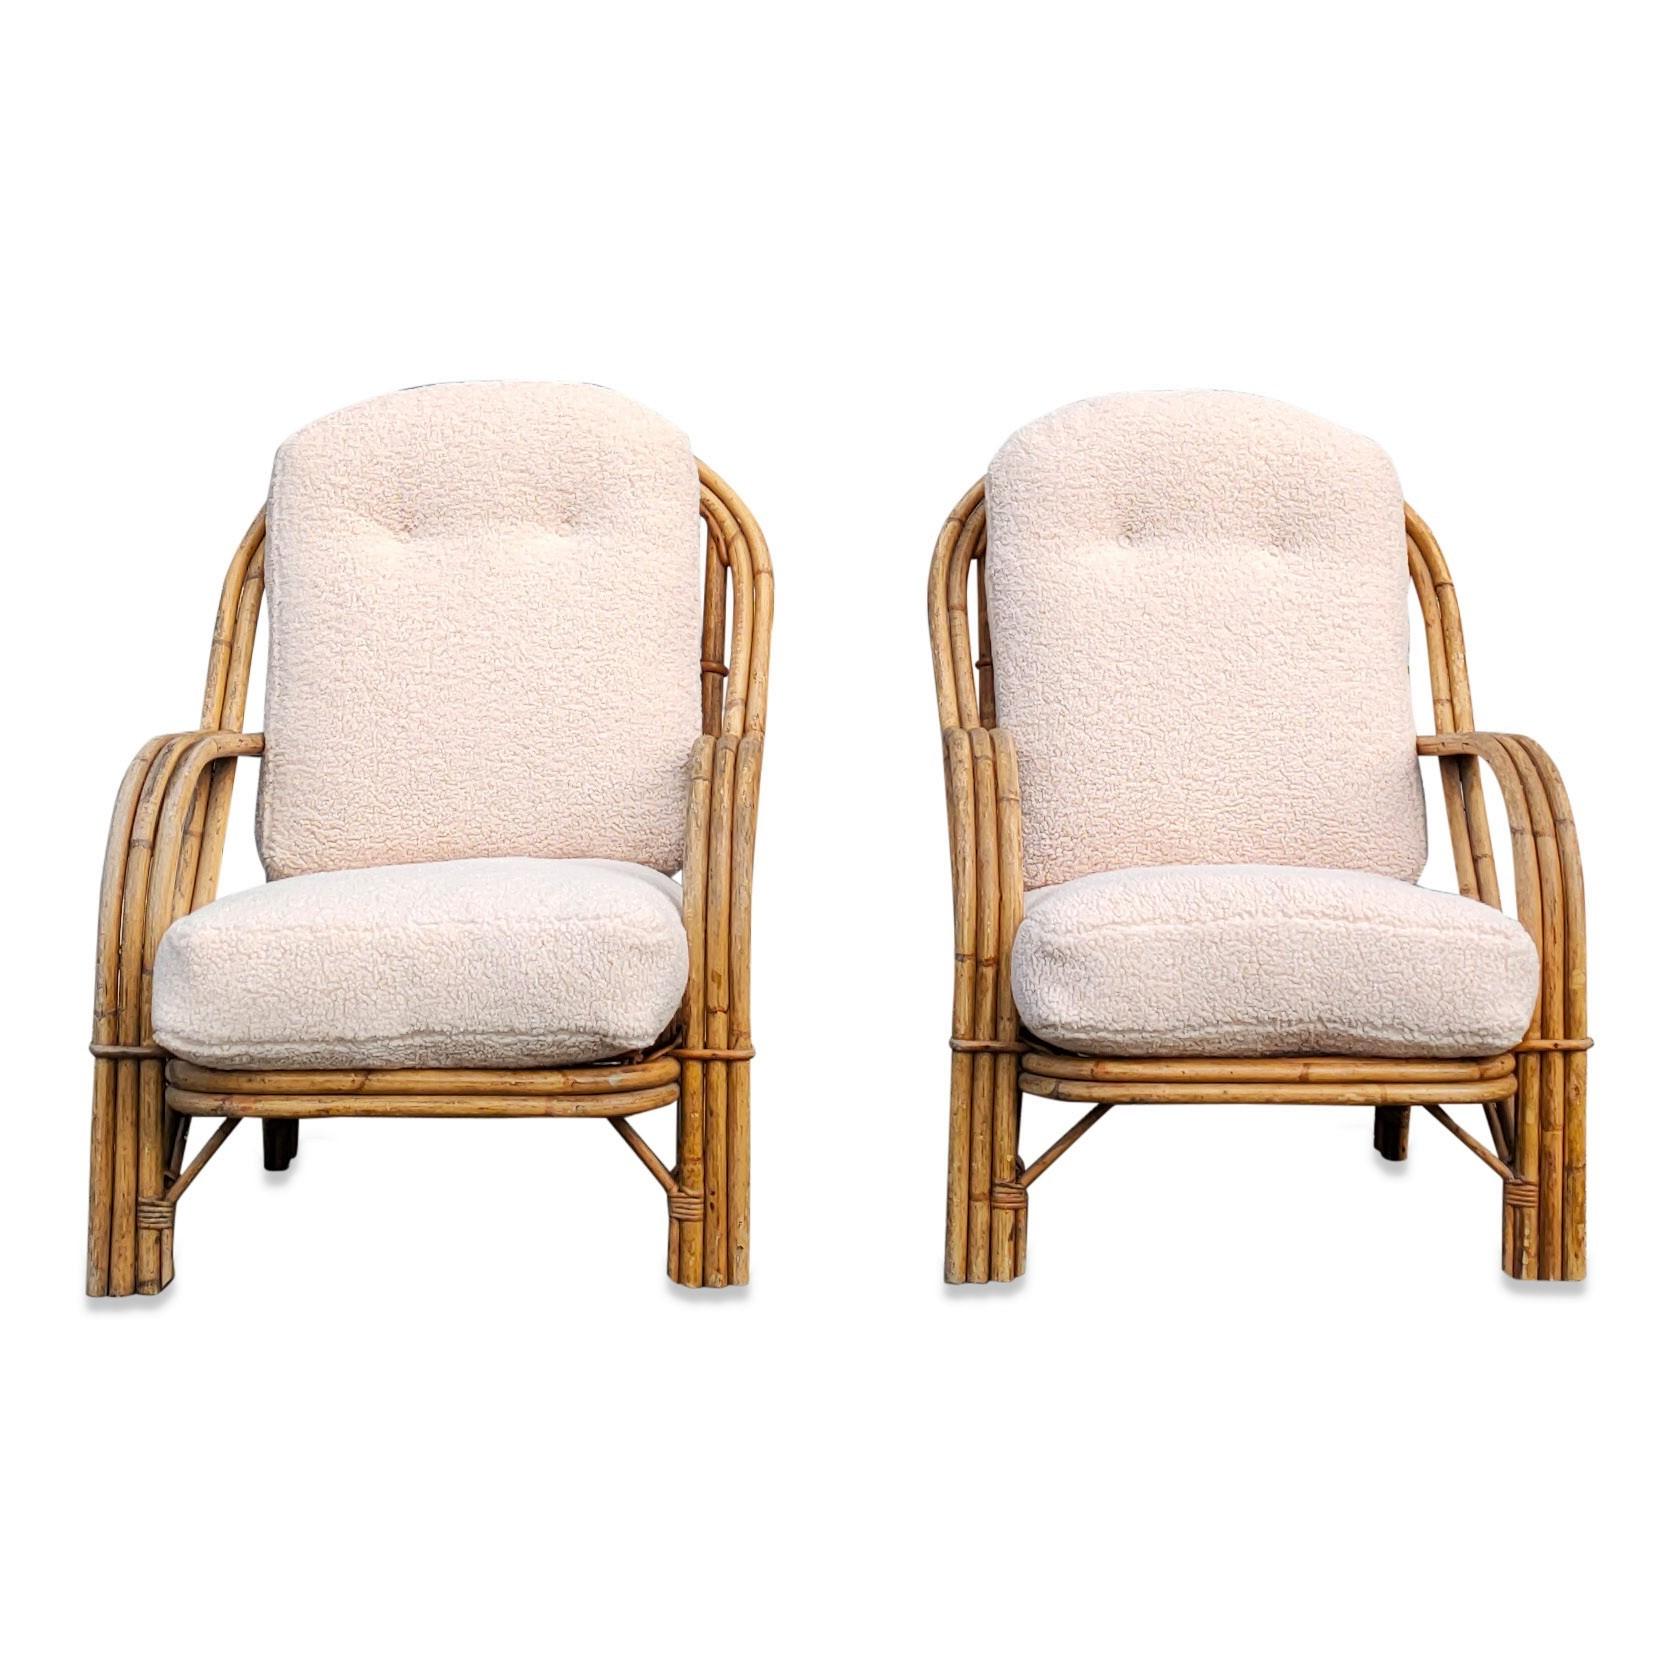 Rattan chairs by French designers Adrien Audoux and Frida Minnet
Golfe Juan
French Riviera
in good vintage condition
freshly upholstered cushions in creme bouclé
These chairs will ship out of France and can be returned to either France or